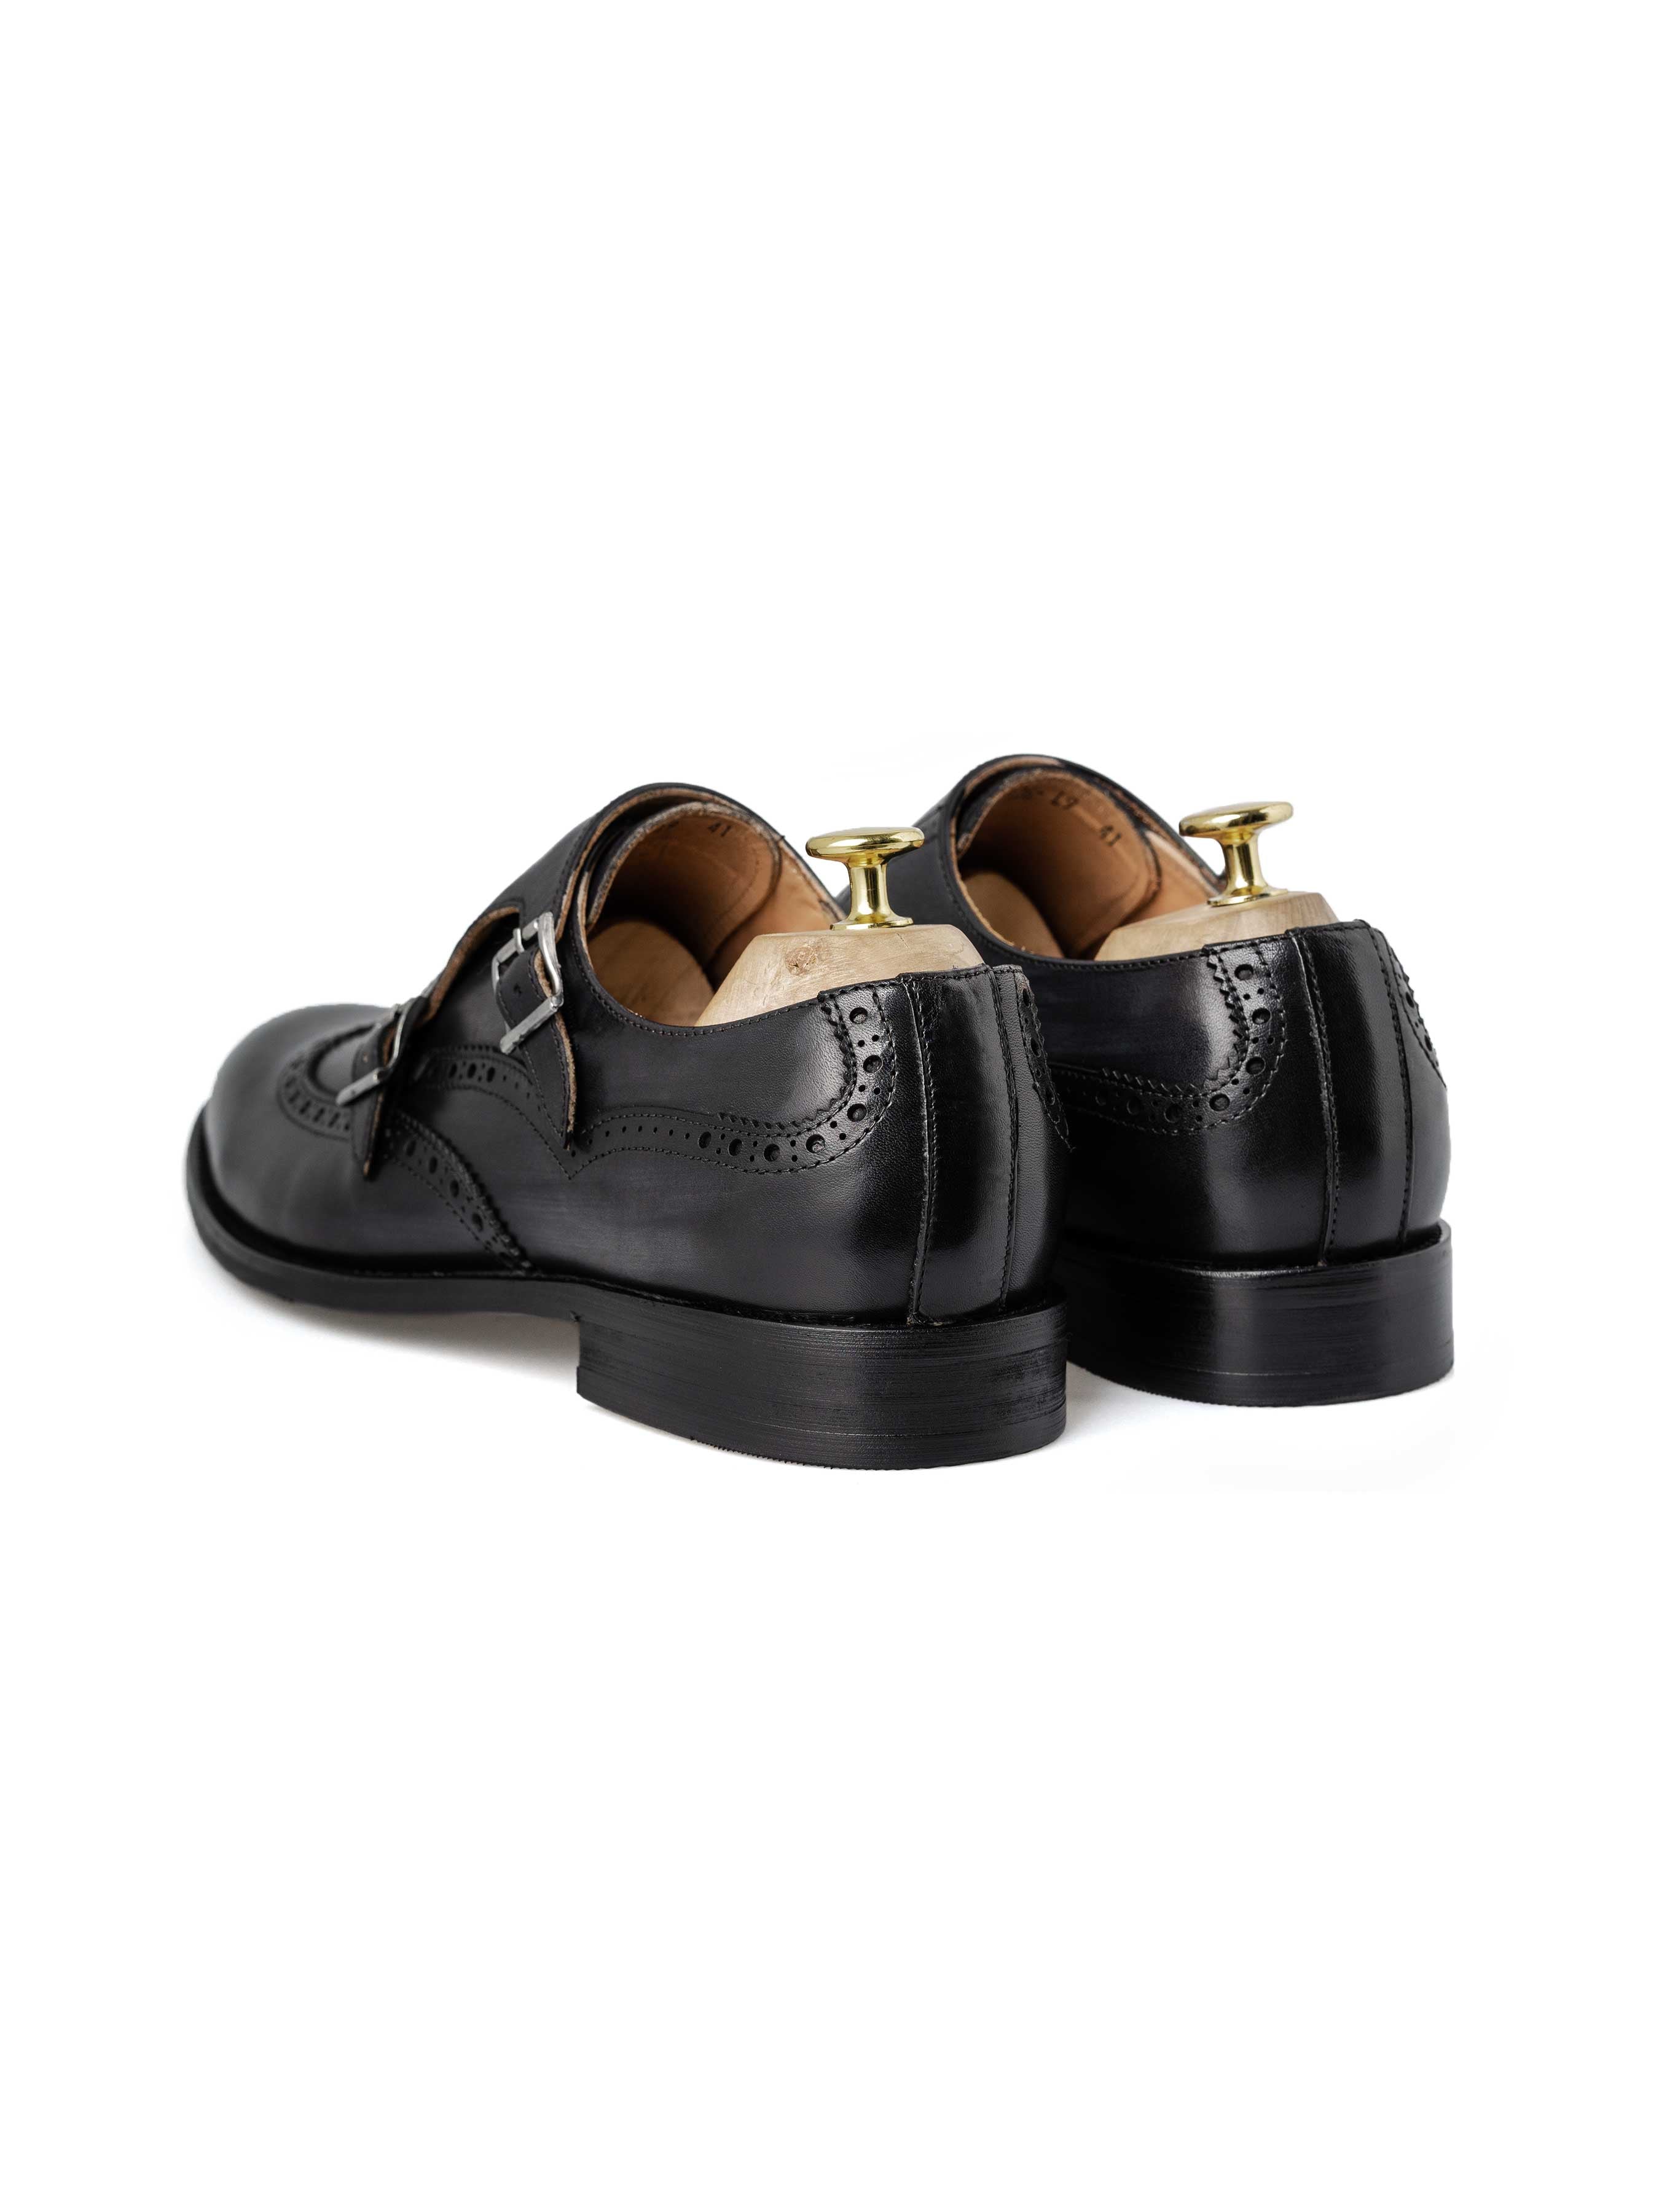 Double Monk Strap Brogue Wingtip - Black Grey (Hand Painted Patina) - Zeve Shoes